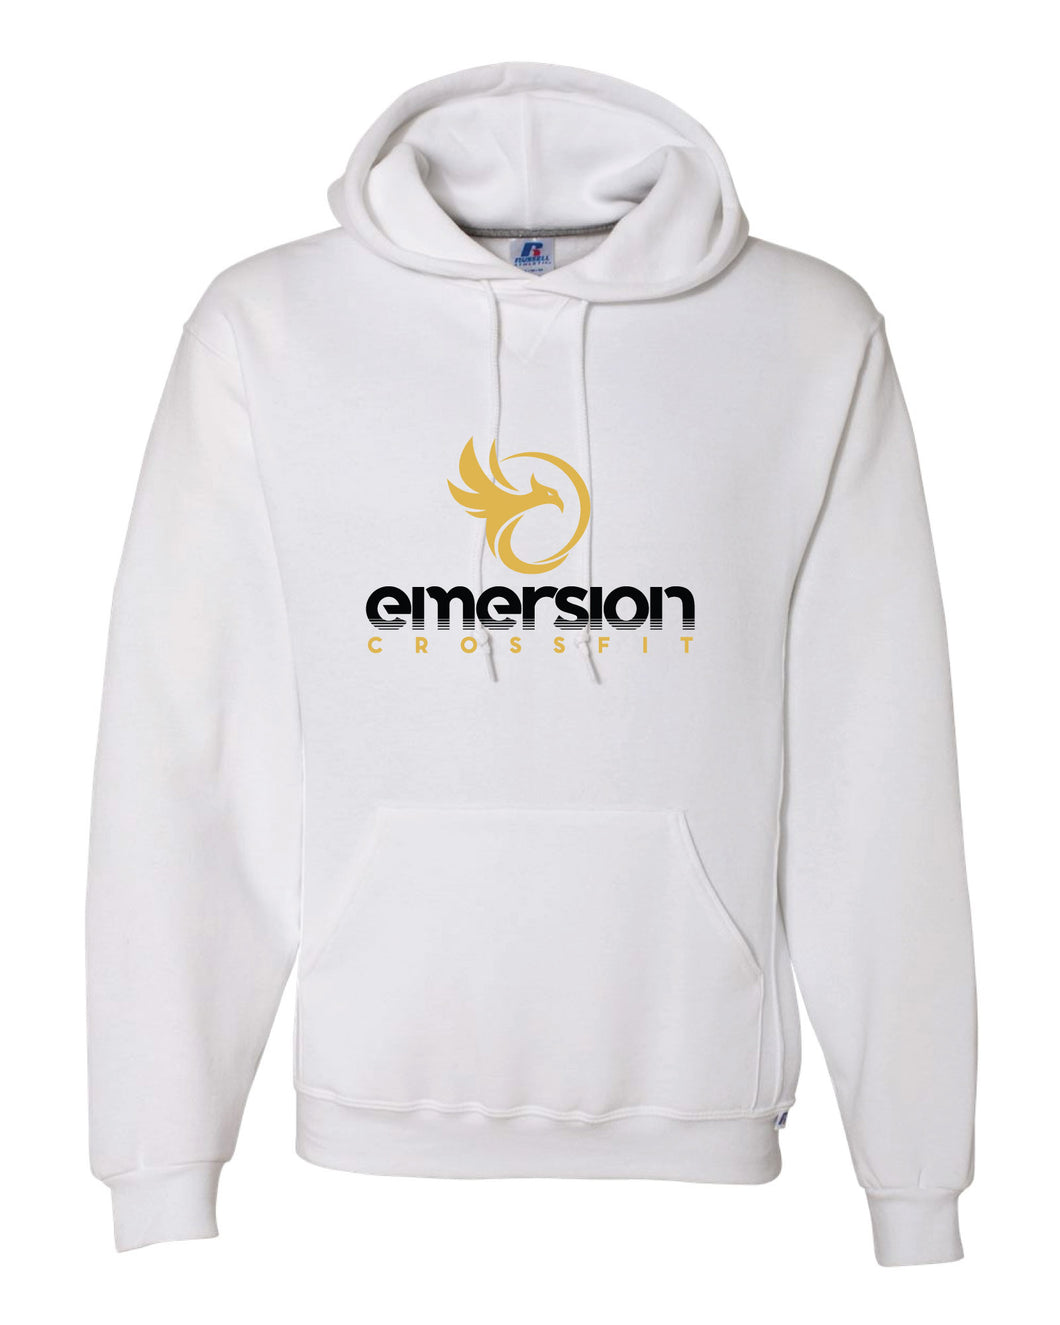 Emersion Crossfit Russell Athletic Cotton Hoodie - White - 5KounT2018